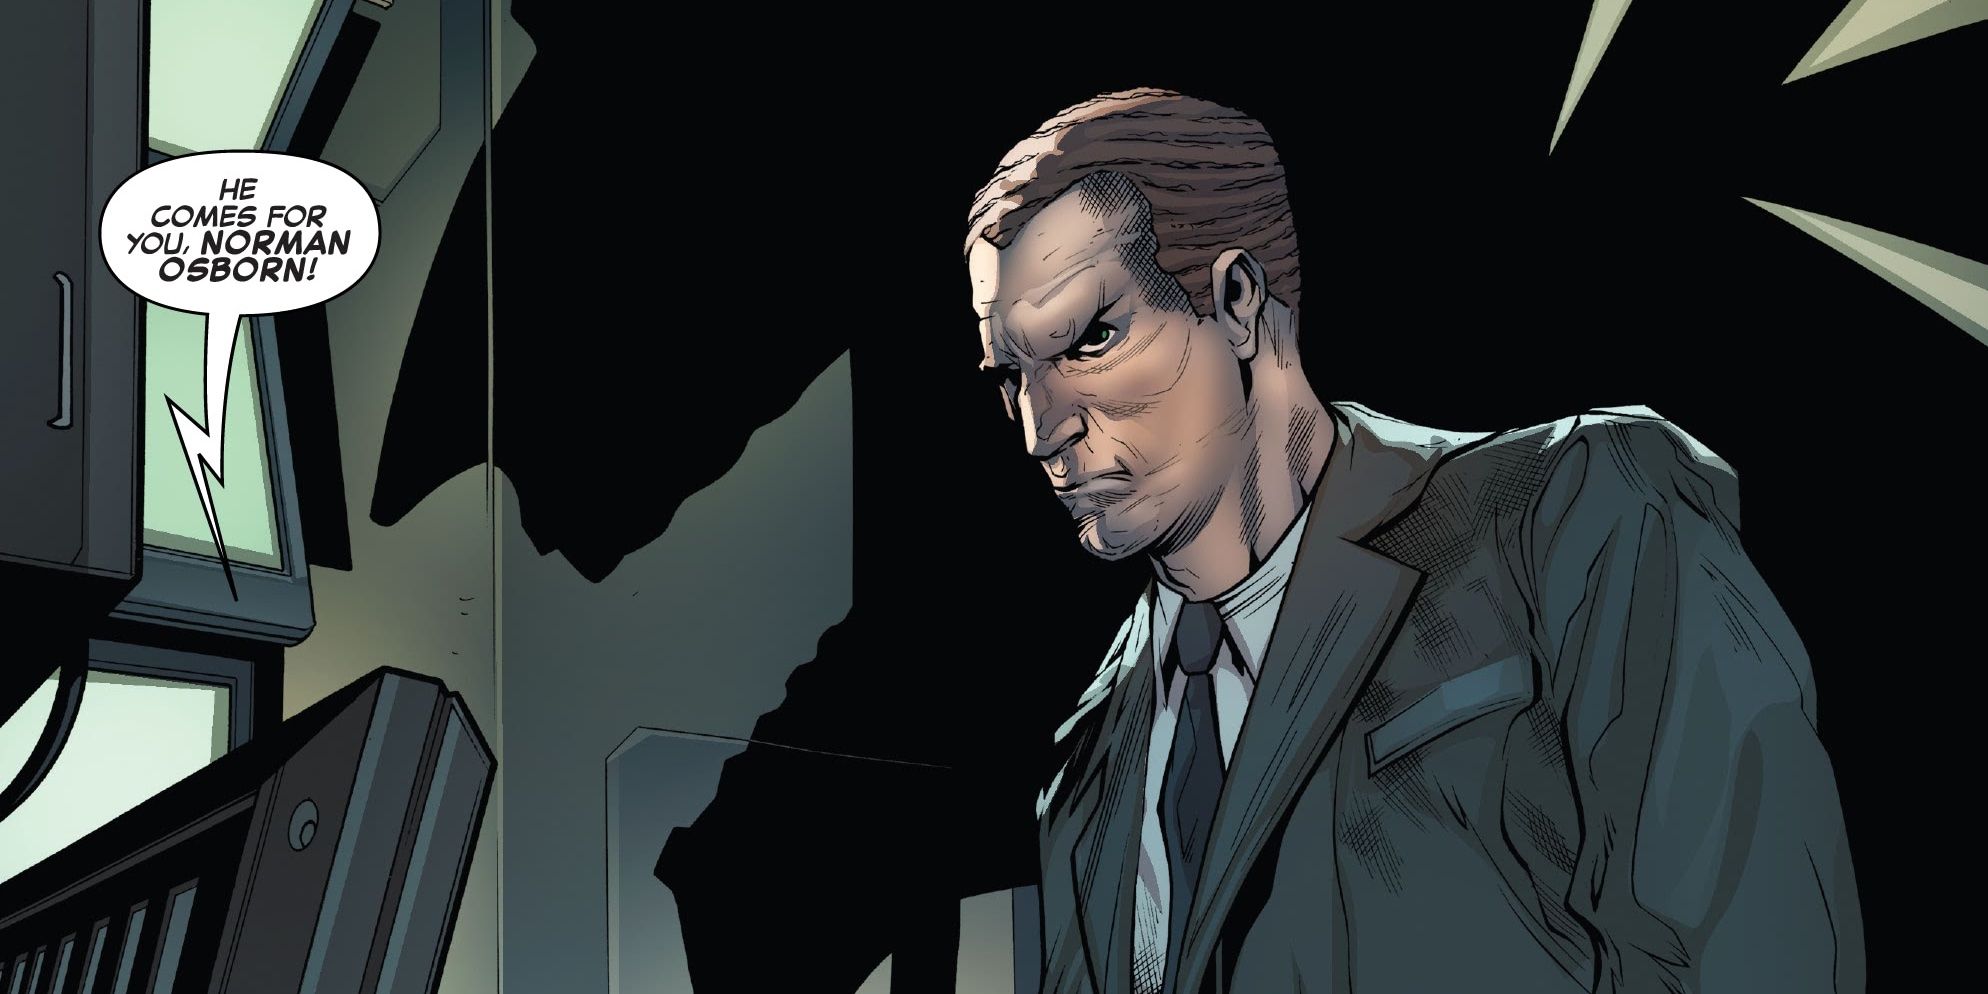 To be clear, Spider-Man certainly has cause to save Norman Osborn. 